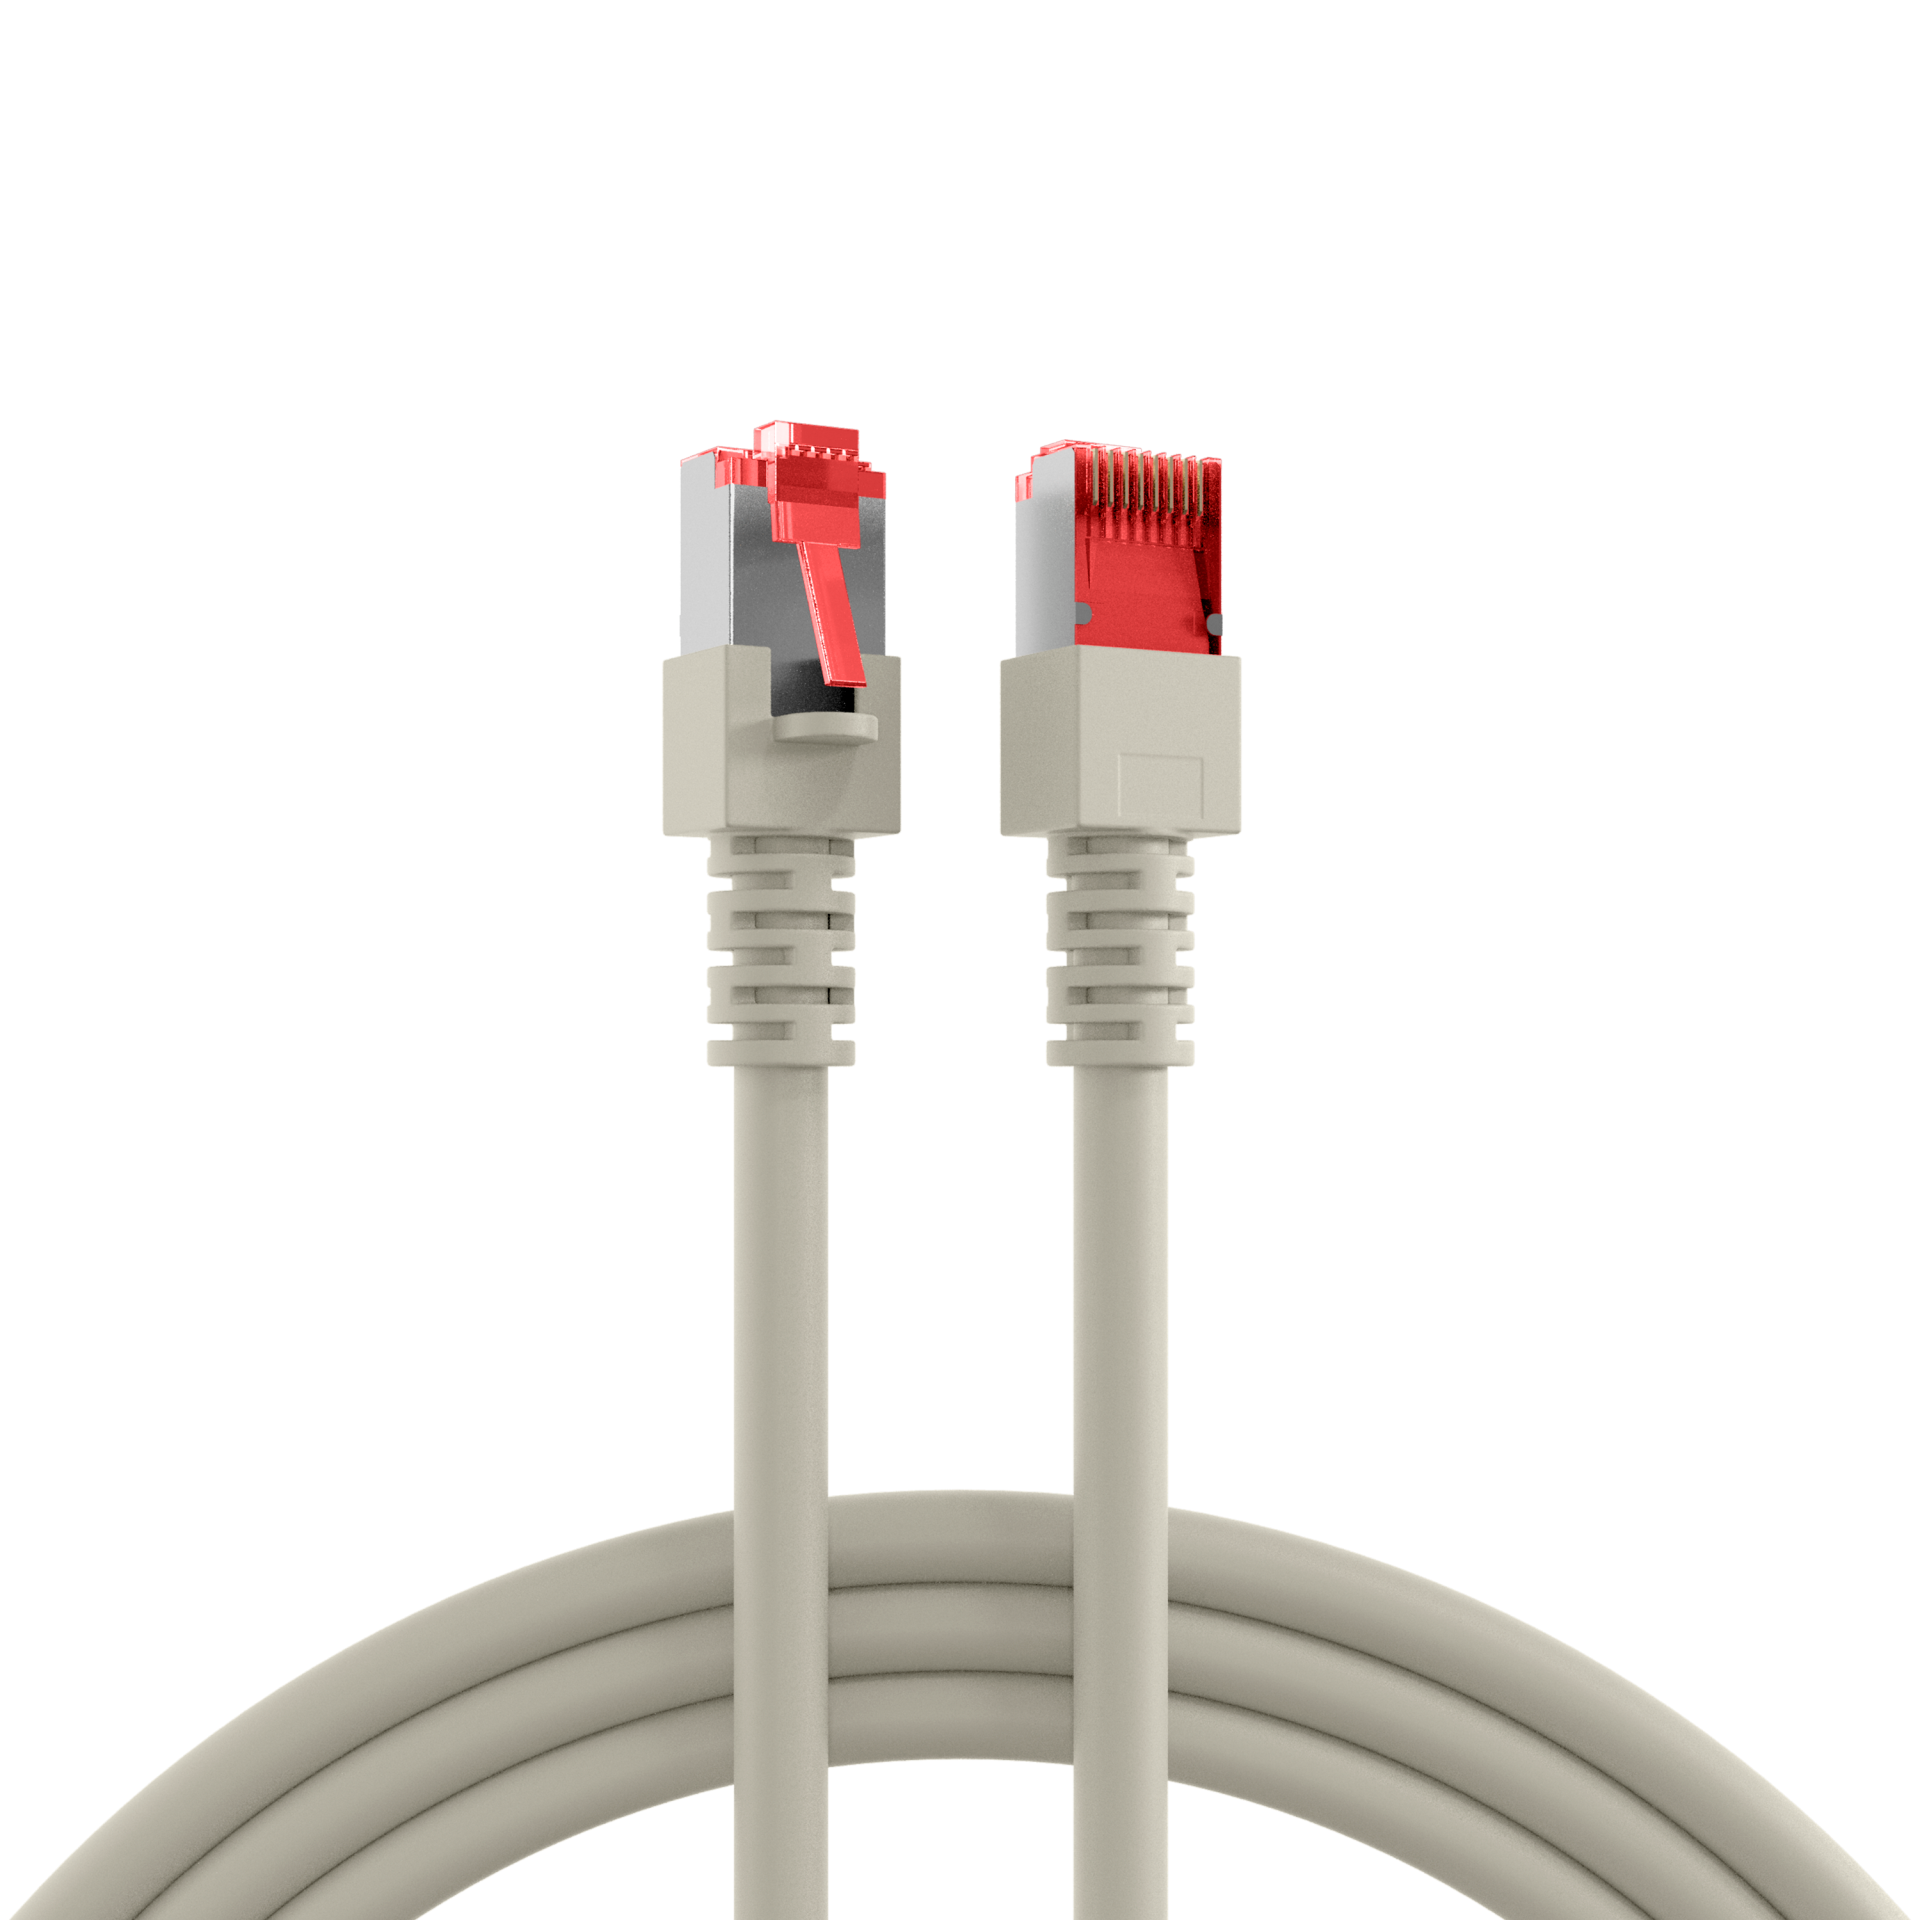 Purchase cables & the | expert EFB-Elektronik from adaptors online